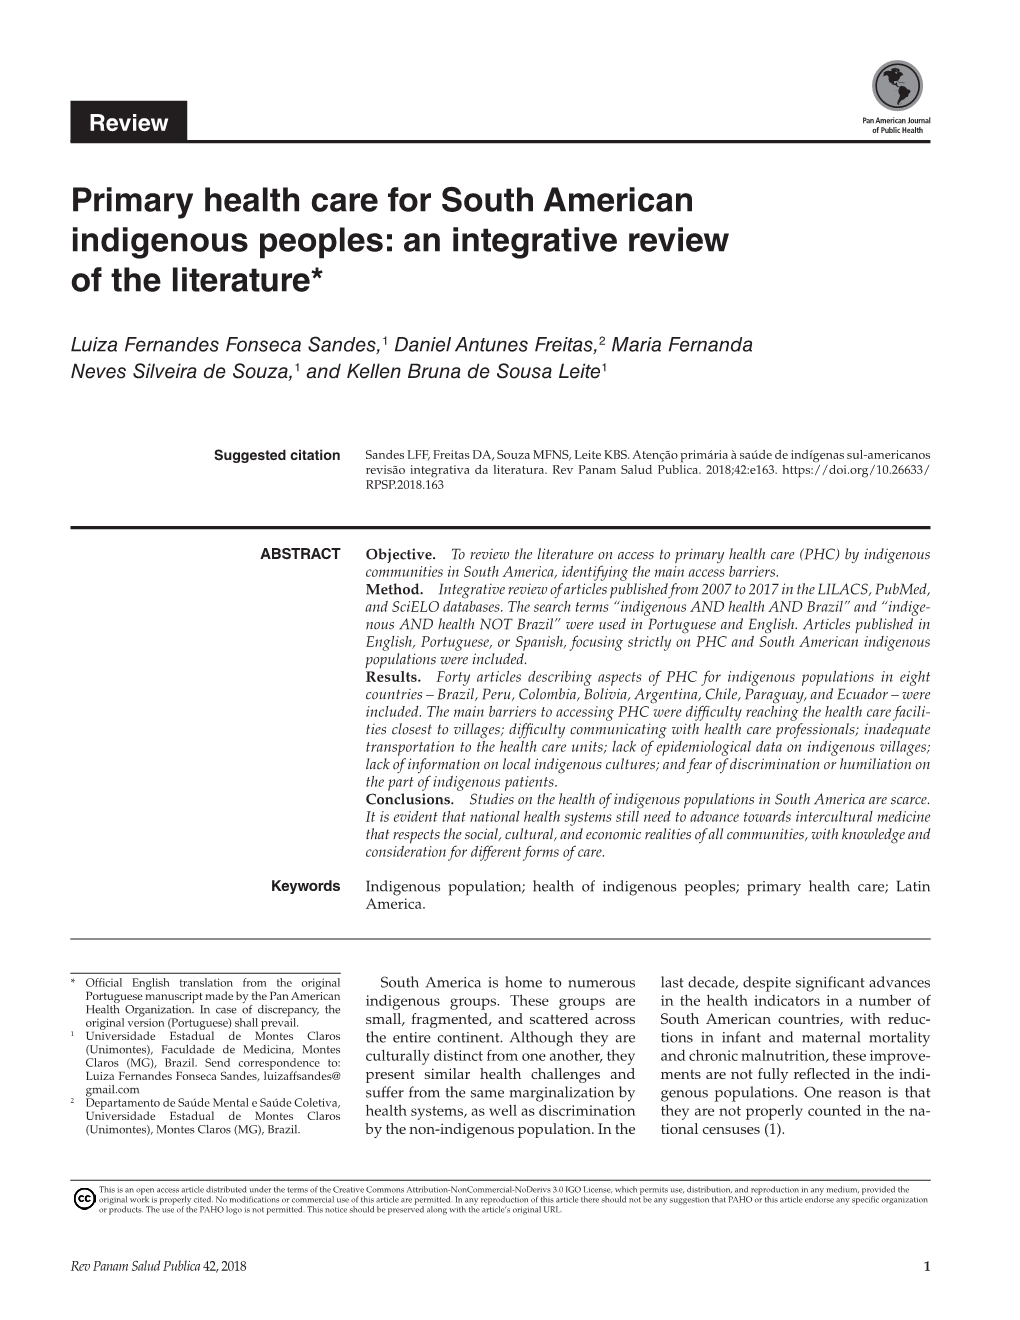 Primary Health Care for South American Indigenous Peoples: an Integrative Review of the Literature*